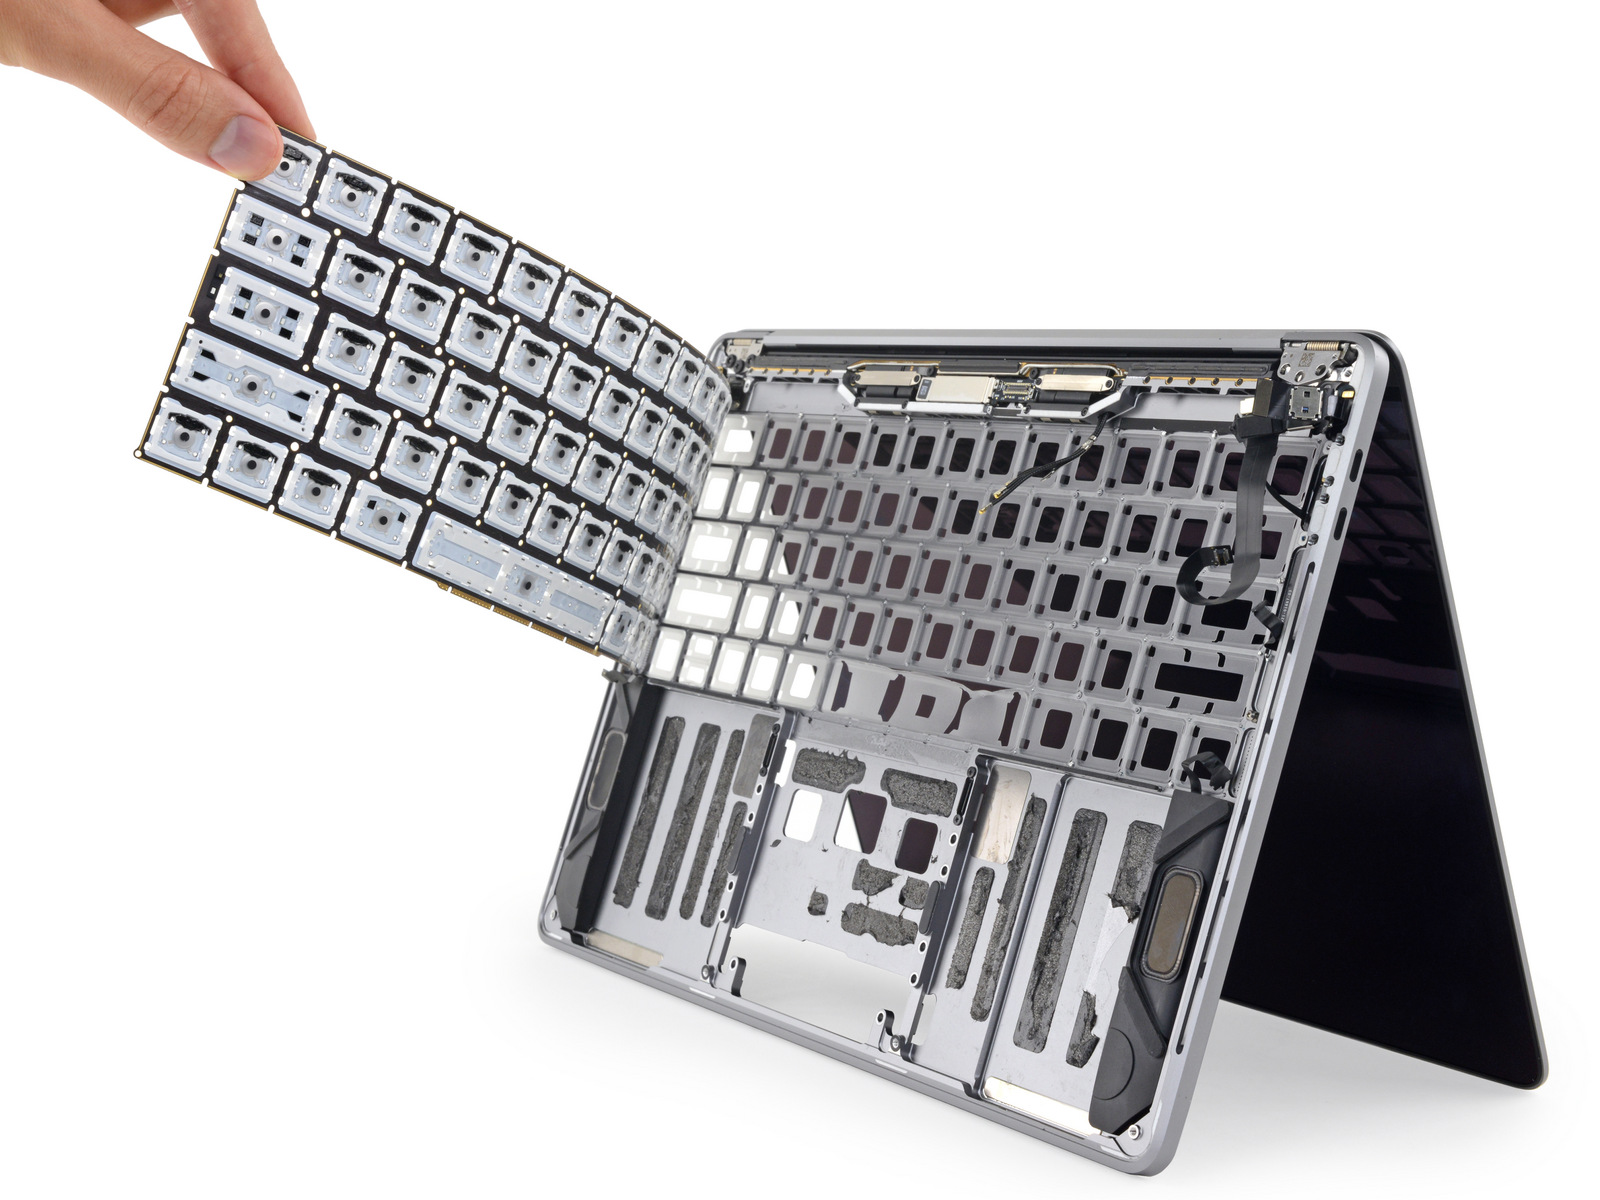 iFixit tests keyboard and silicone membrane of new MacBook Pro